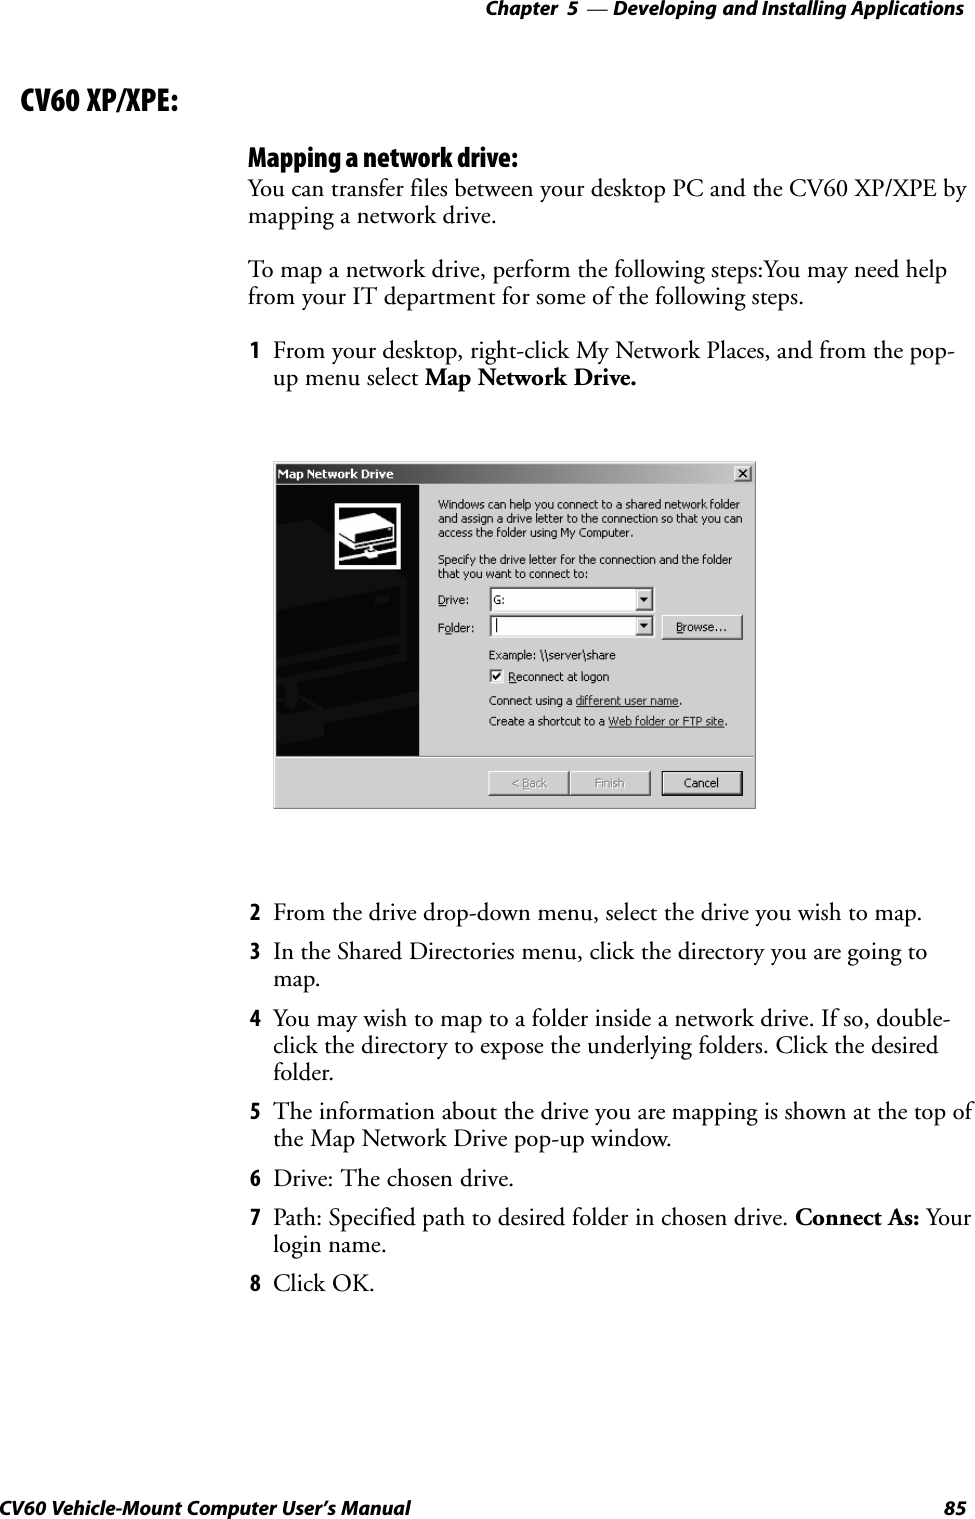 Developing and Installing Applications—Chapter  585CV60 Vehicle-Mount Computer User&apos;s Manual    CV60 XP/XPE:Mapping a network drive:You can transfer files between your desktop PC and the CV60 XP/XPE bymapping a network drive.To map a network drive, perform the following steps:You may need helpfrom your IT department for some of the following steps.1From your desktop, right-click My Network Places, and from the pop-up menu select Map Network Drive.2From the drive drop-down menu, select the drive you wish to map.3In the Shared Directories menu, click the directory you are going tomap.4You may wish to map to a folder inside a network drive. If so, double-click the directory to expose the underlying folders. Click the desiredfolder.5The information about the drive you are mapping is shown at the top ofthe Map Network Drive pop-up window.6Drive: The chosen drive.7Path: Specified path to desired folder in chosen drive. Connect As: Yourlogin name.8Click OK.